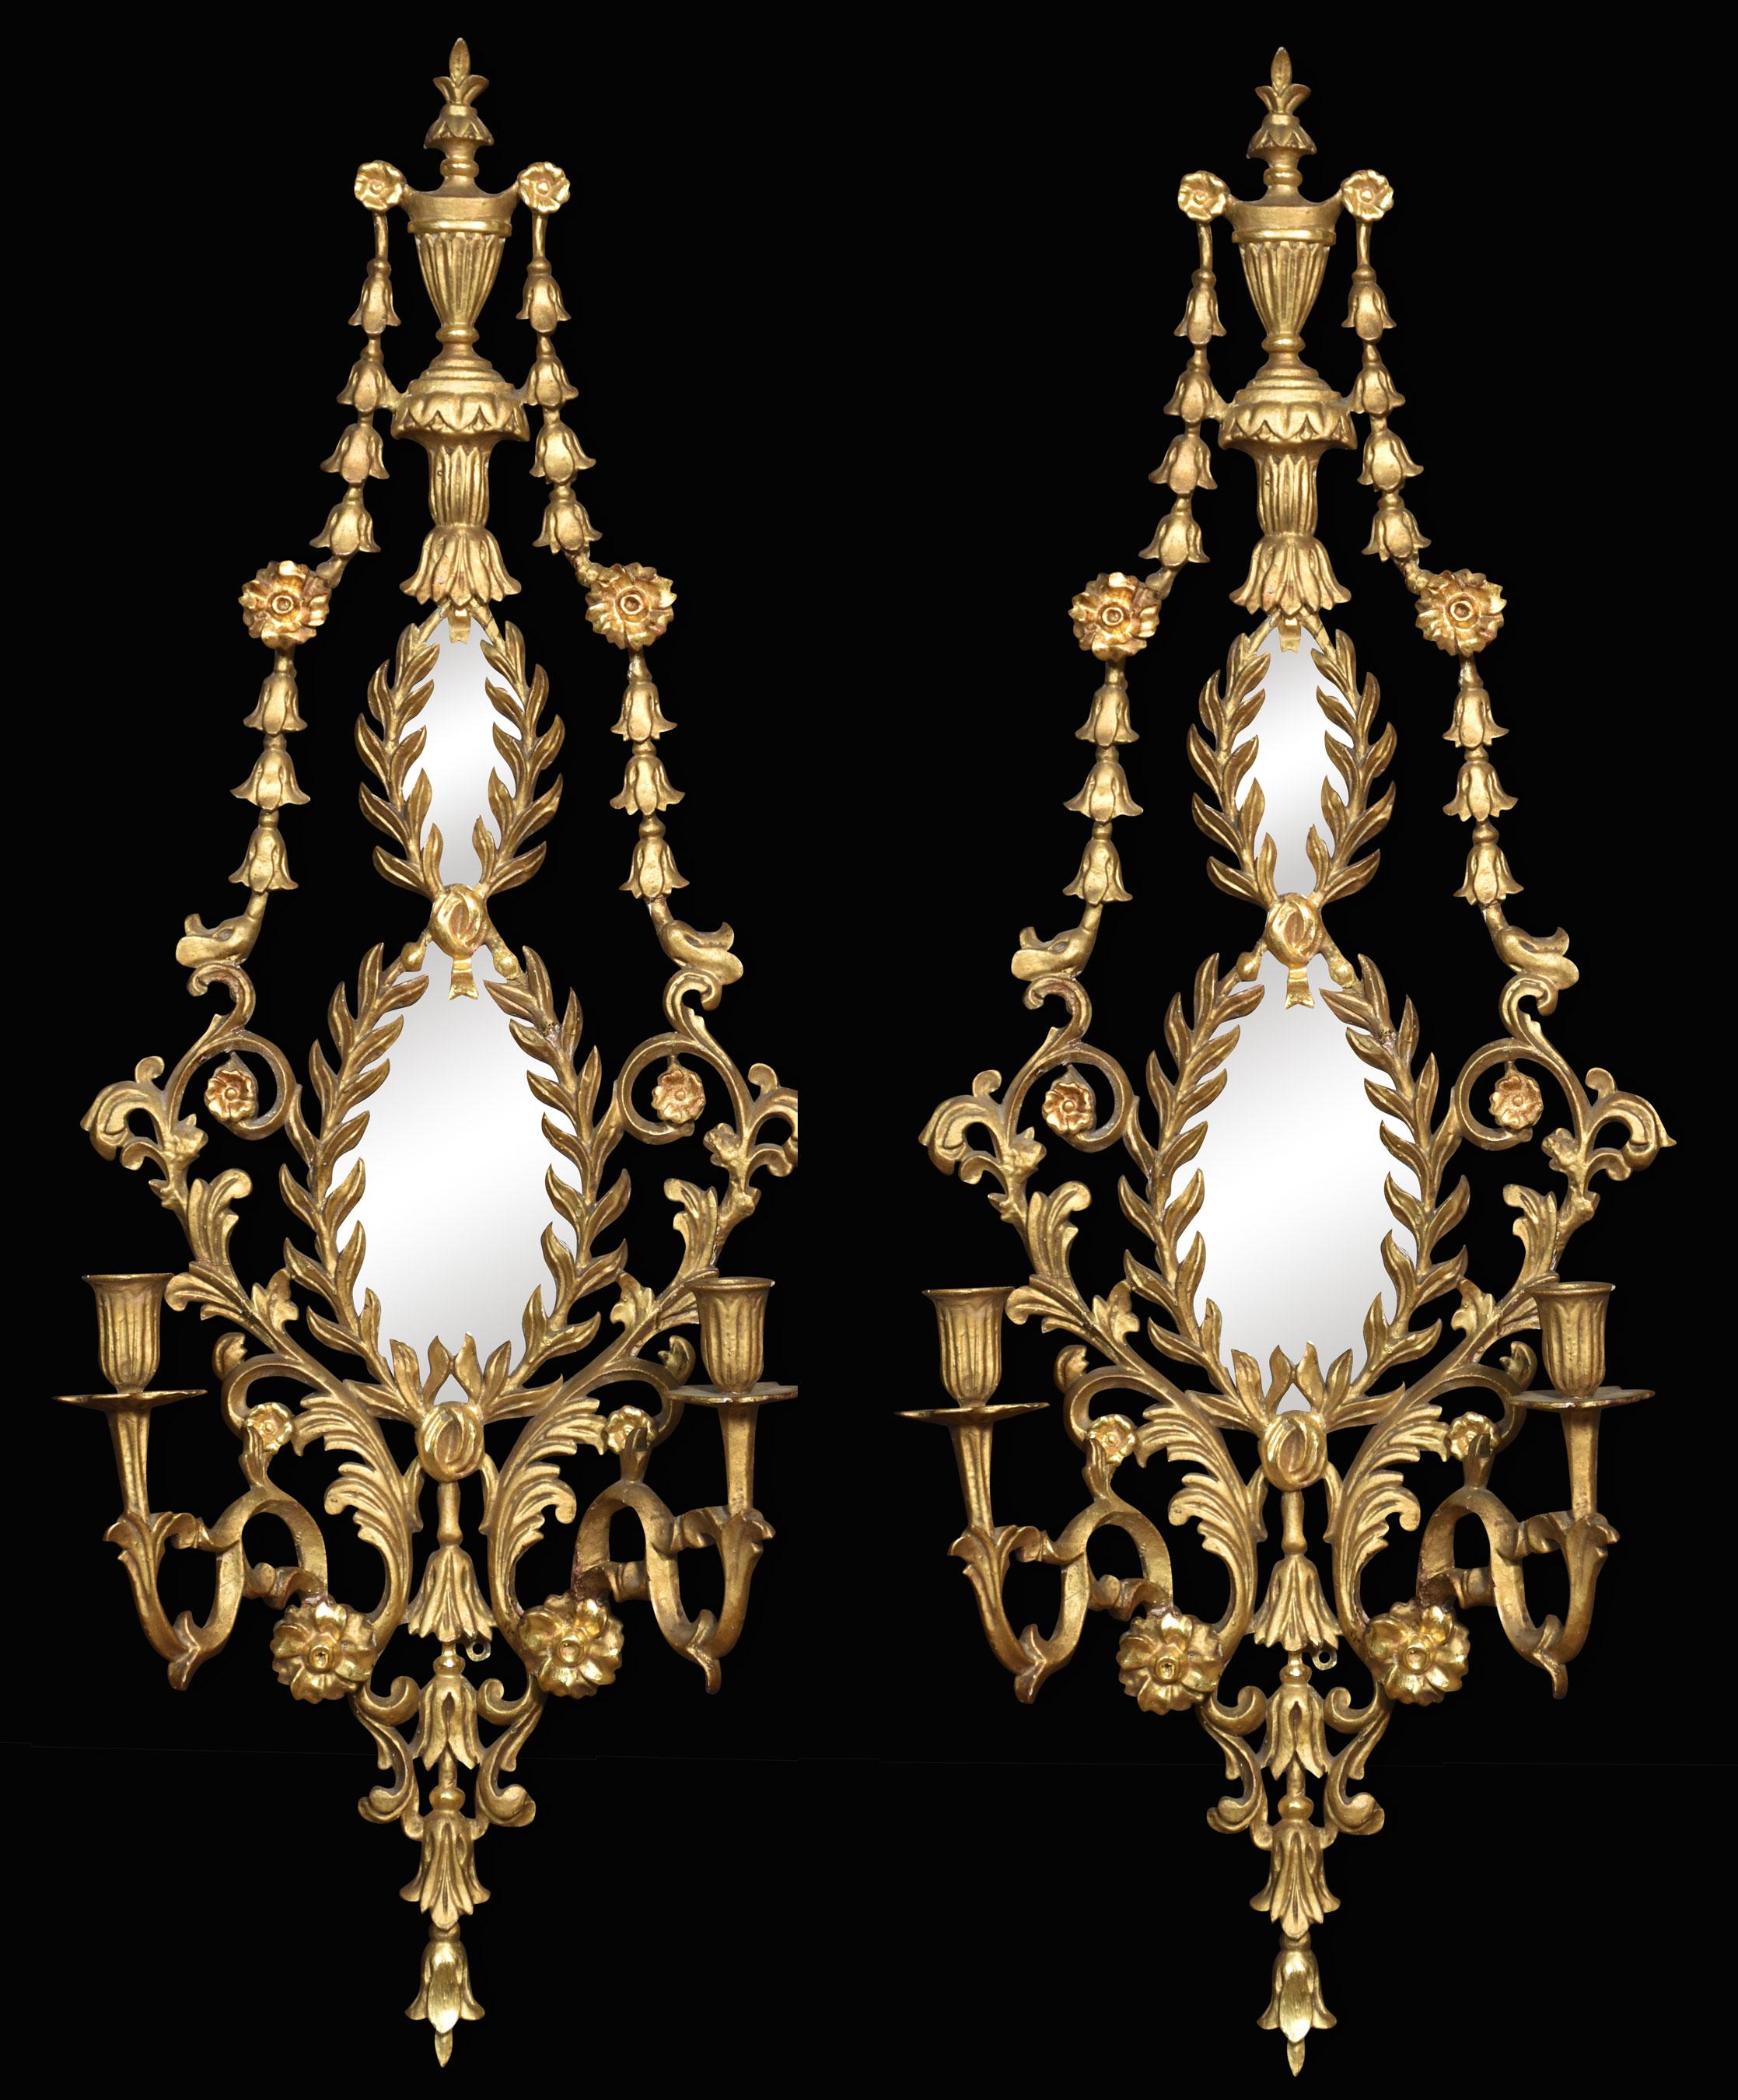 Pair of Neo-Classical style giltwood girandoles For Sale 1